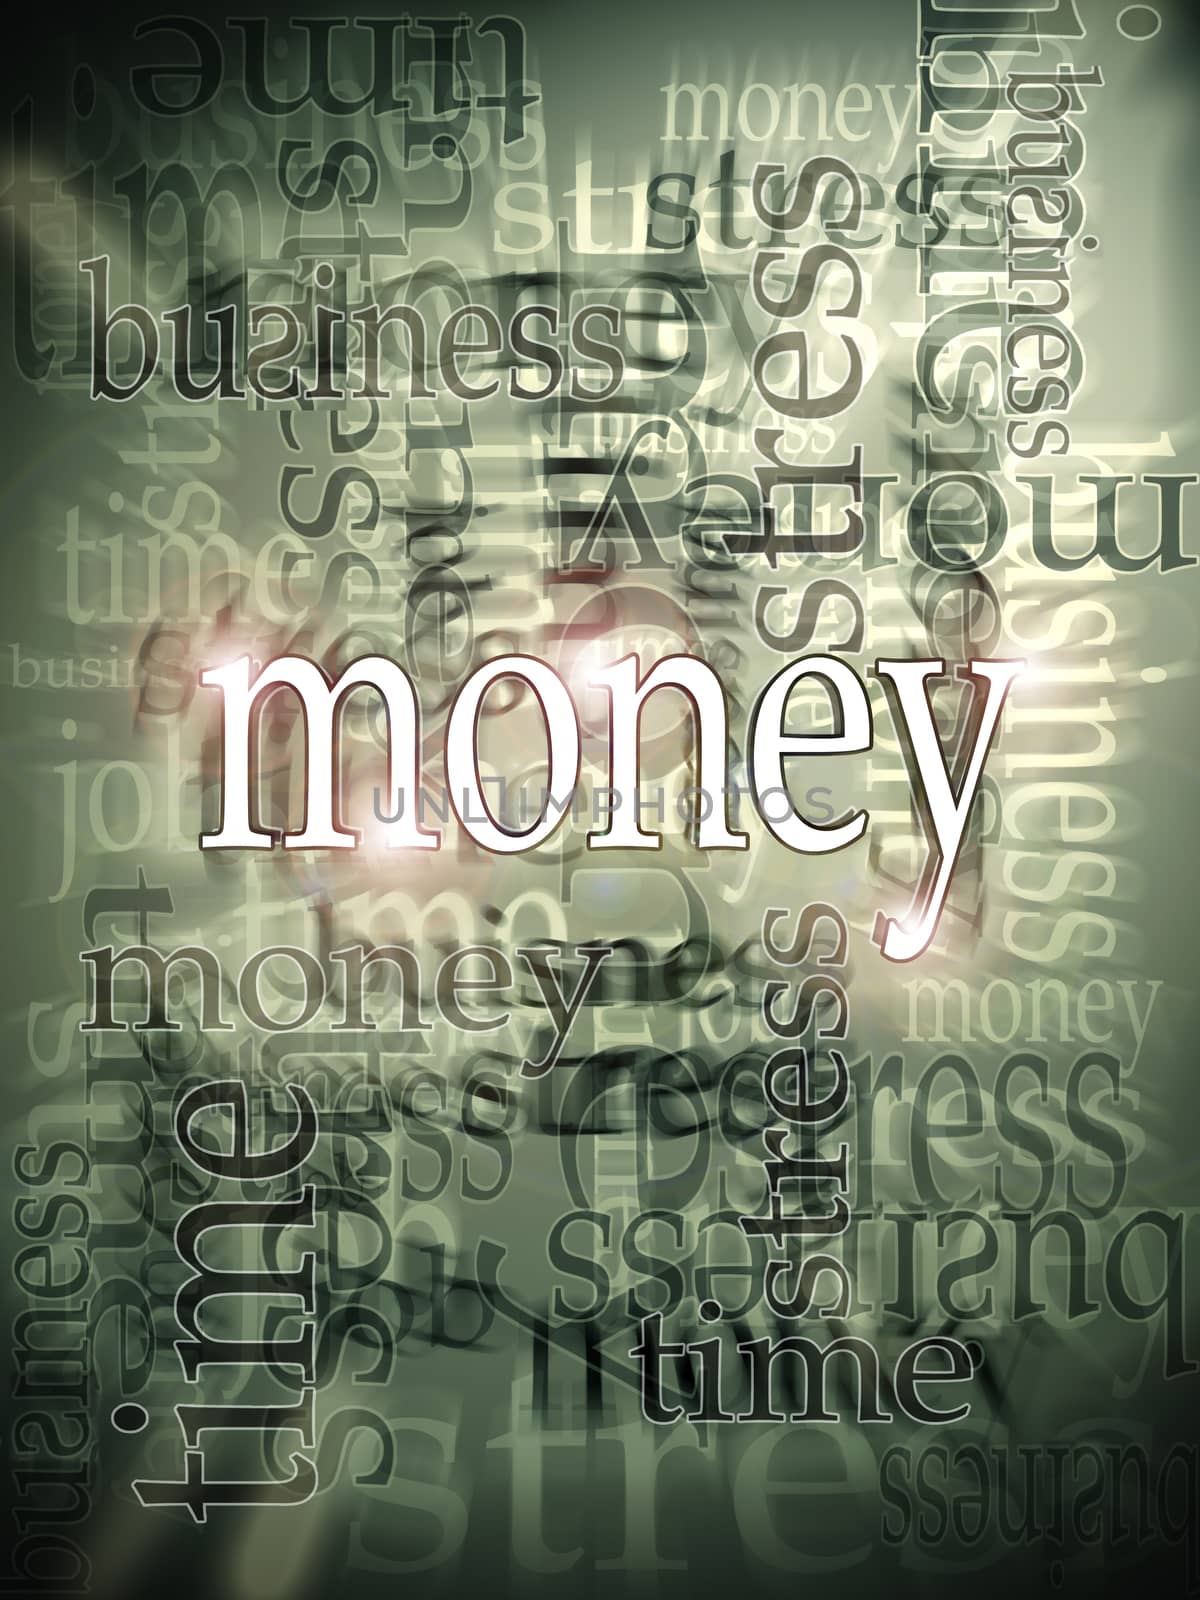 money making abstract background with text